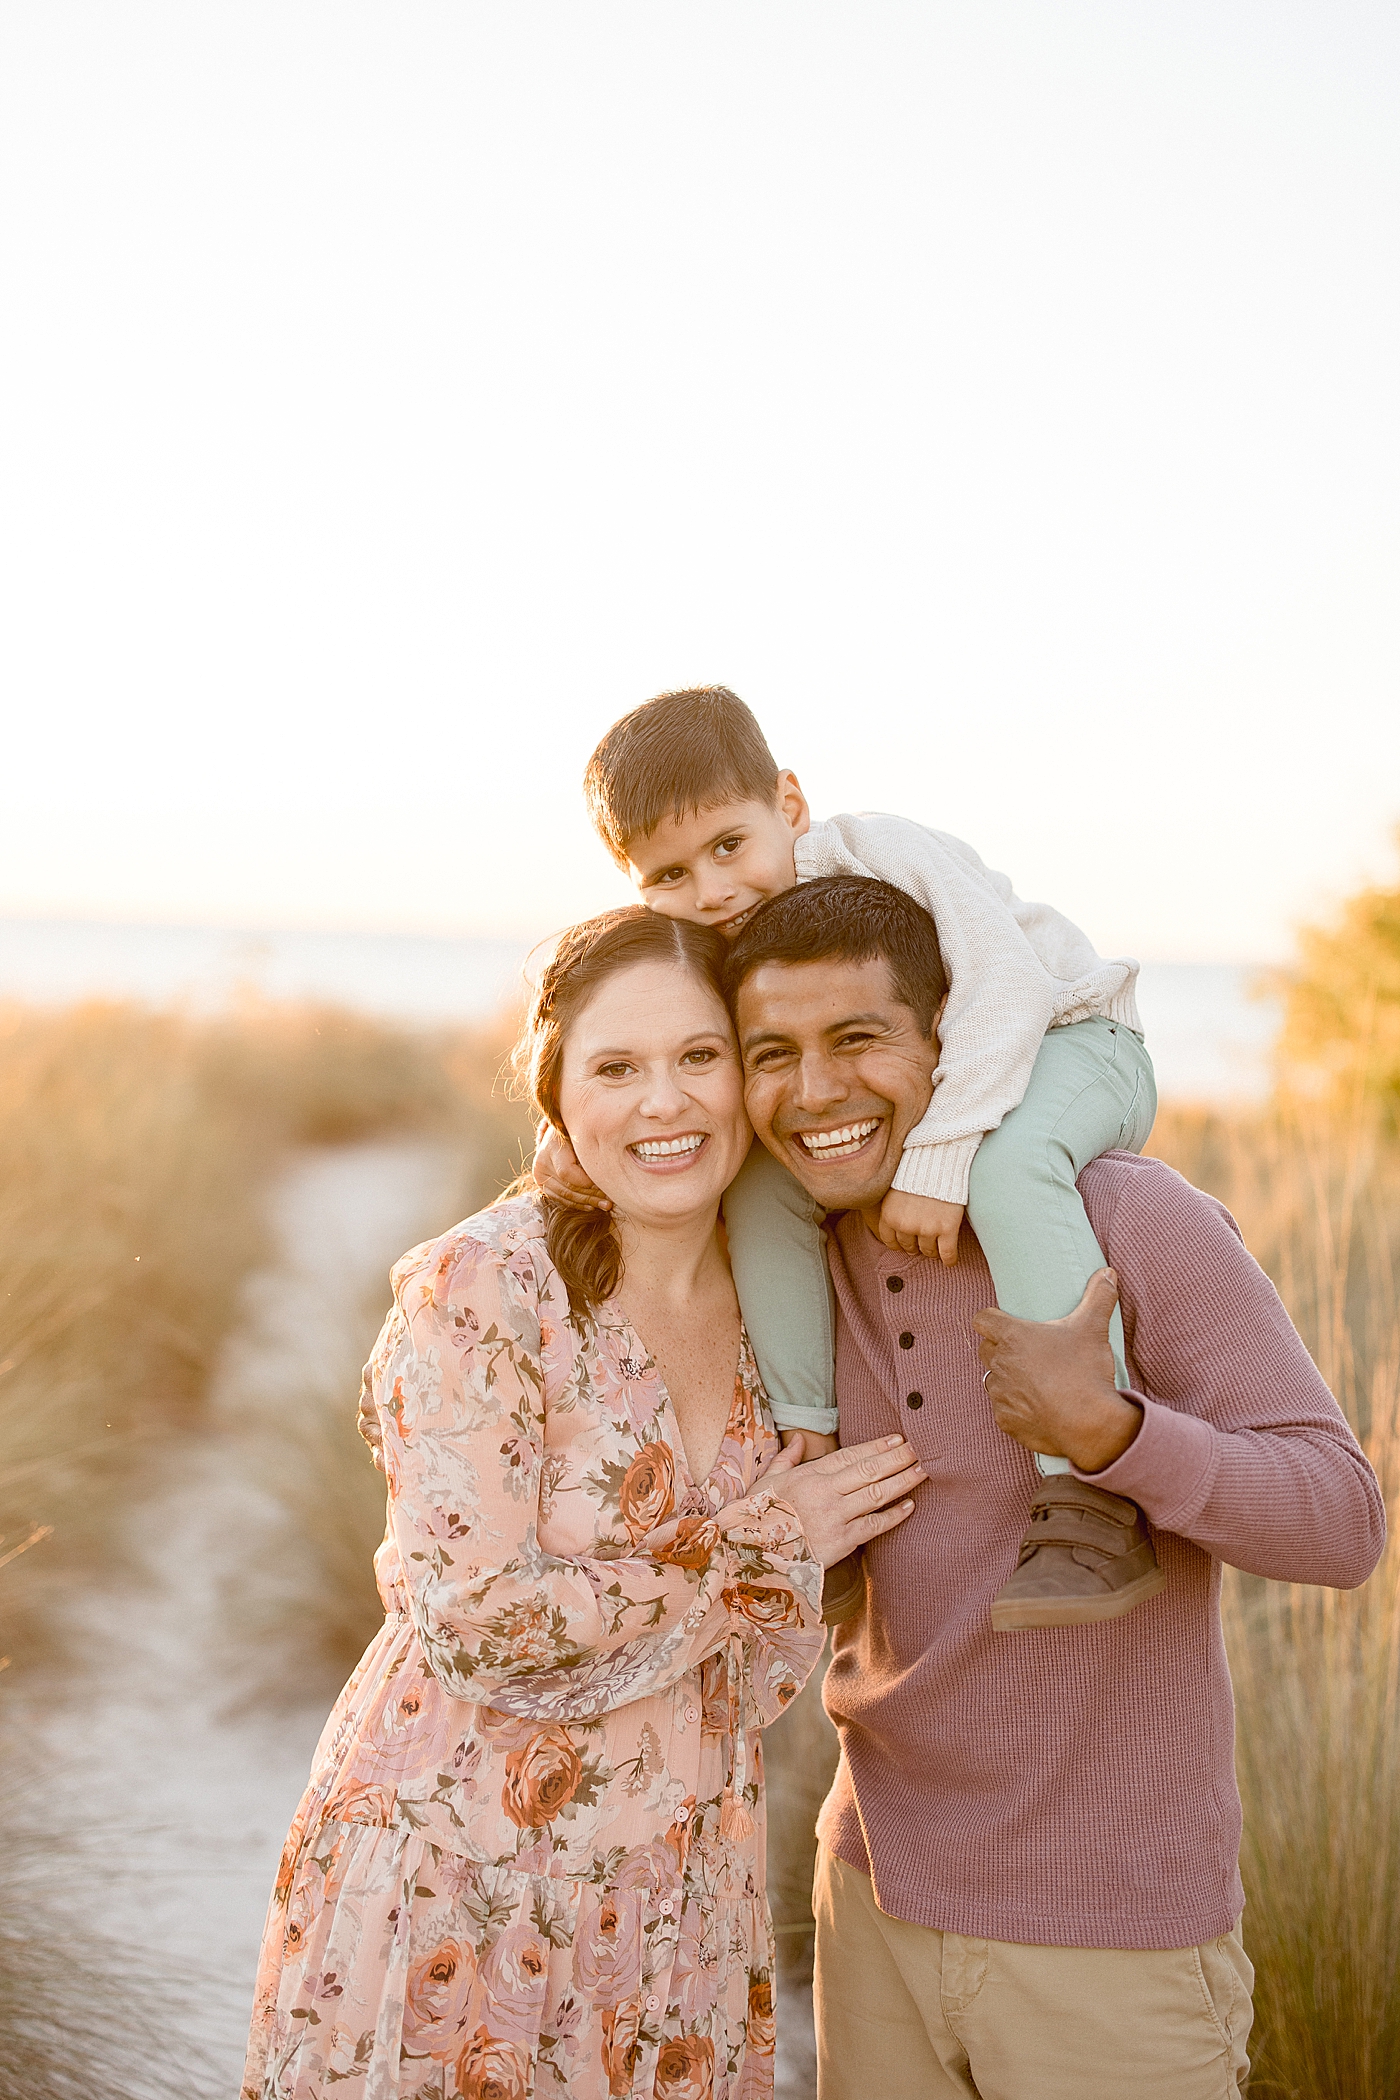 Sunset family photoshoot with Tampa Photographer, Brittany Elise Photography.